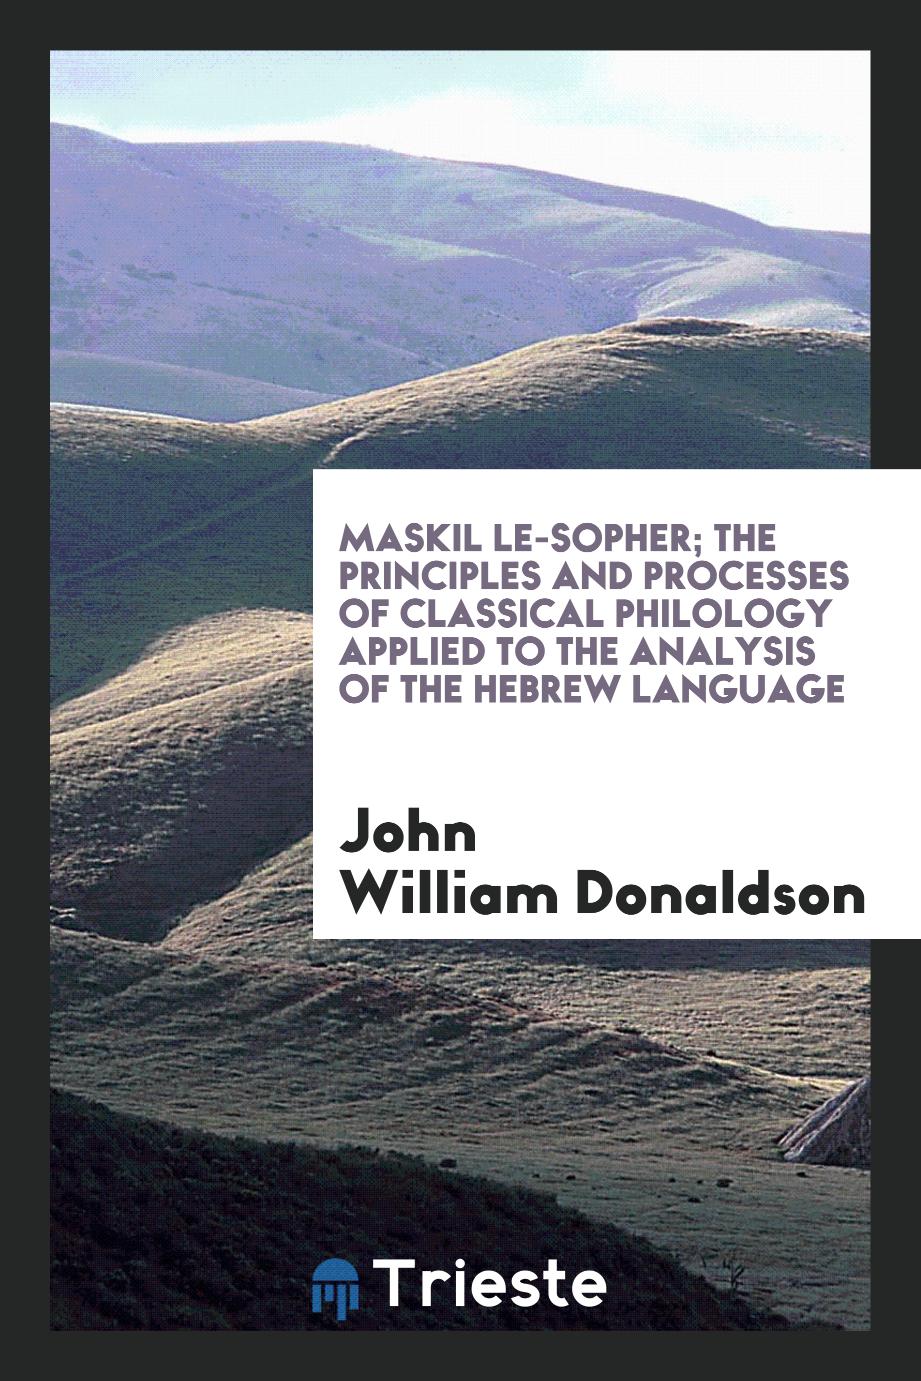 Maskil le-sopher; the principles and processes of classical philology applied to the analysis of the Hebrew Language